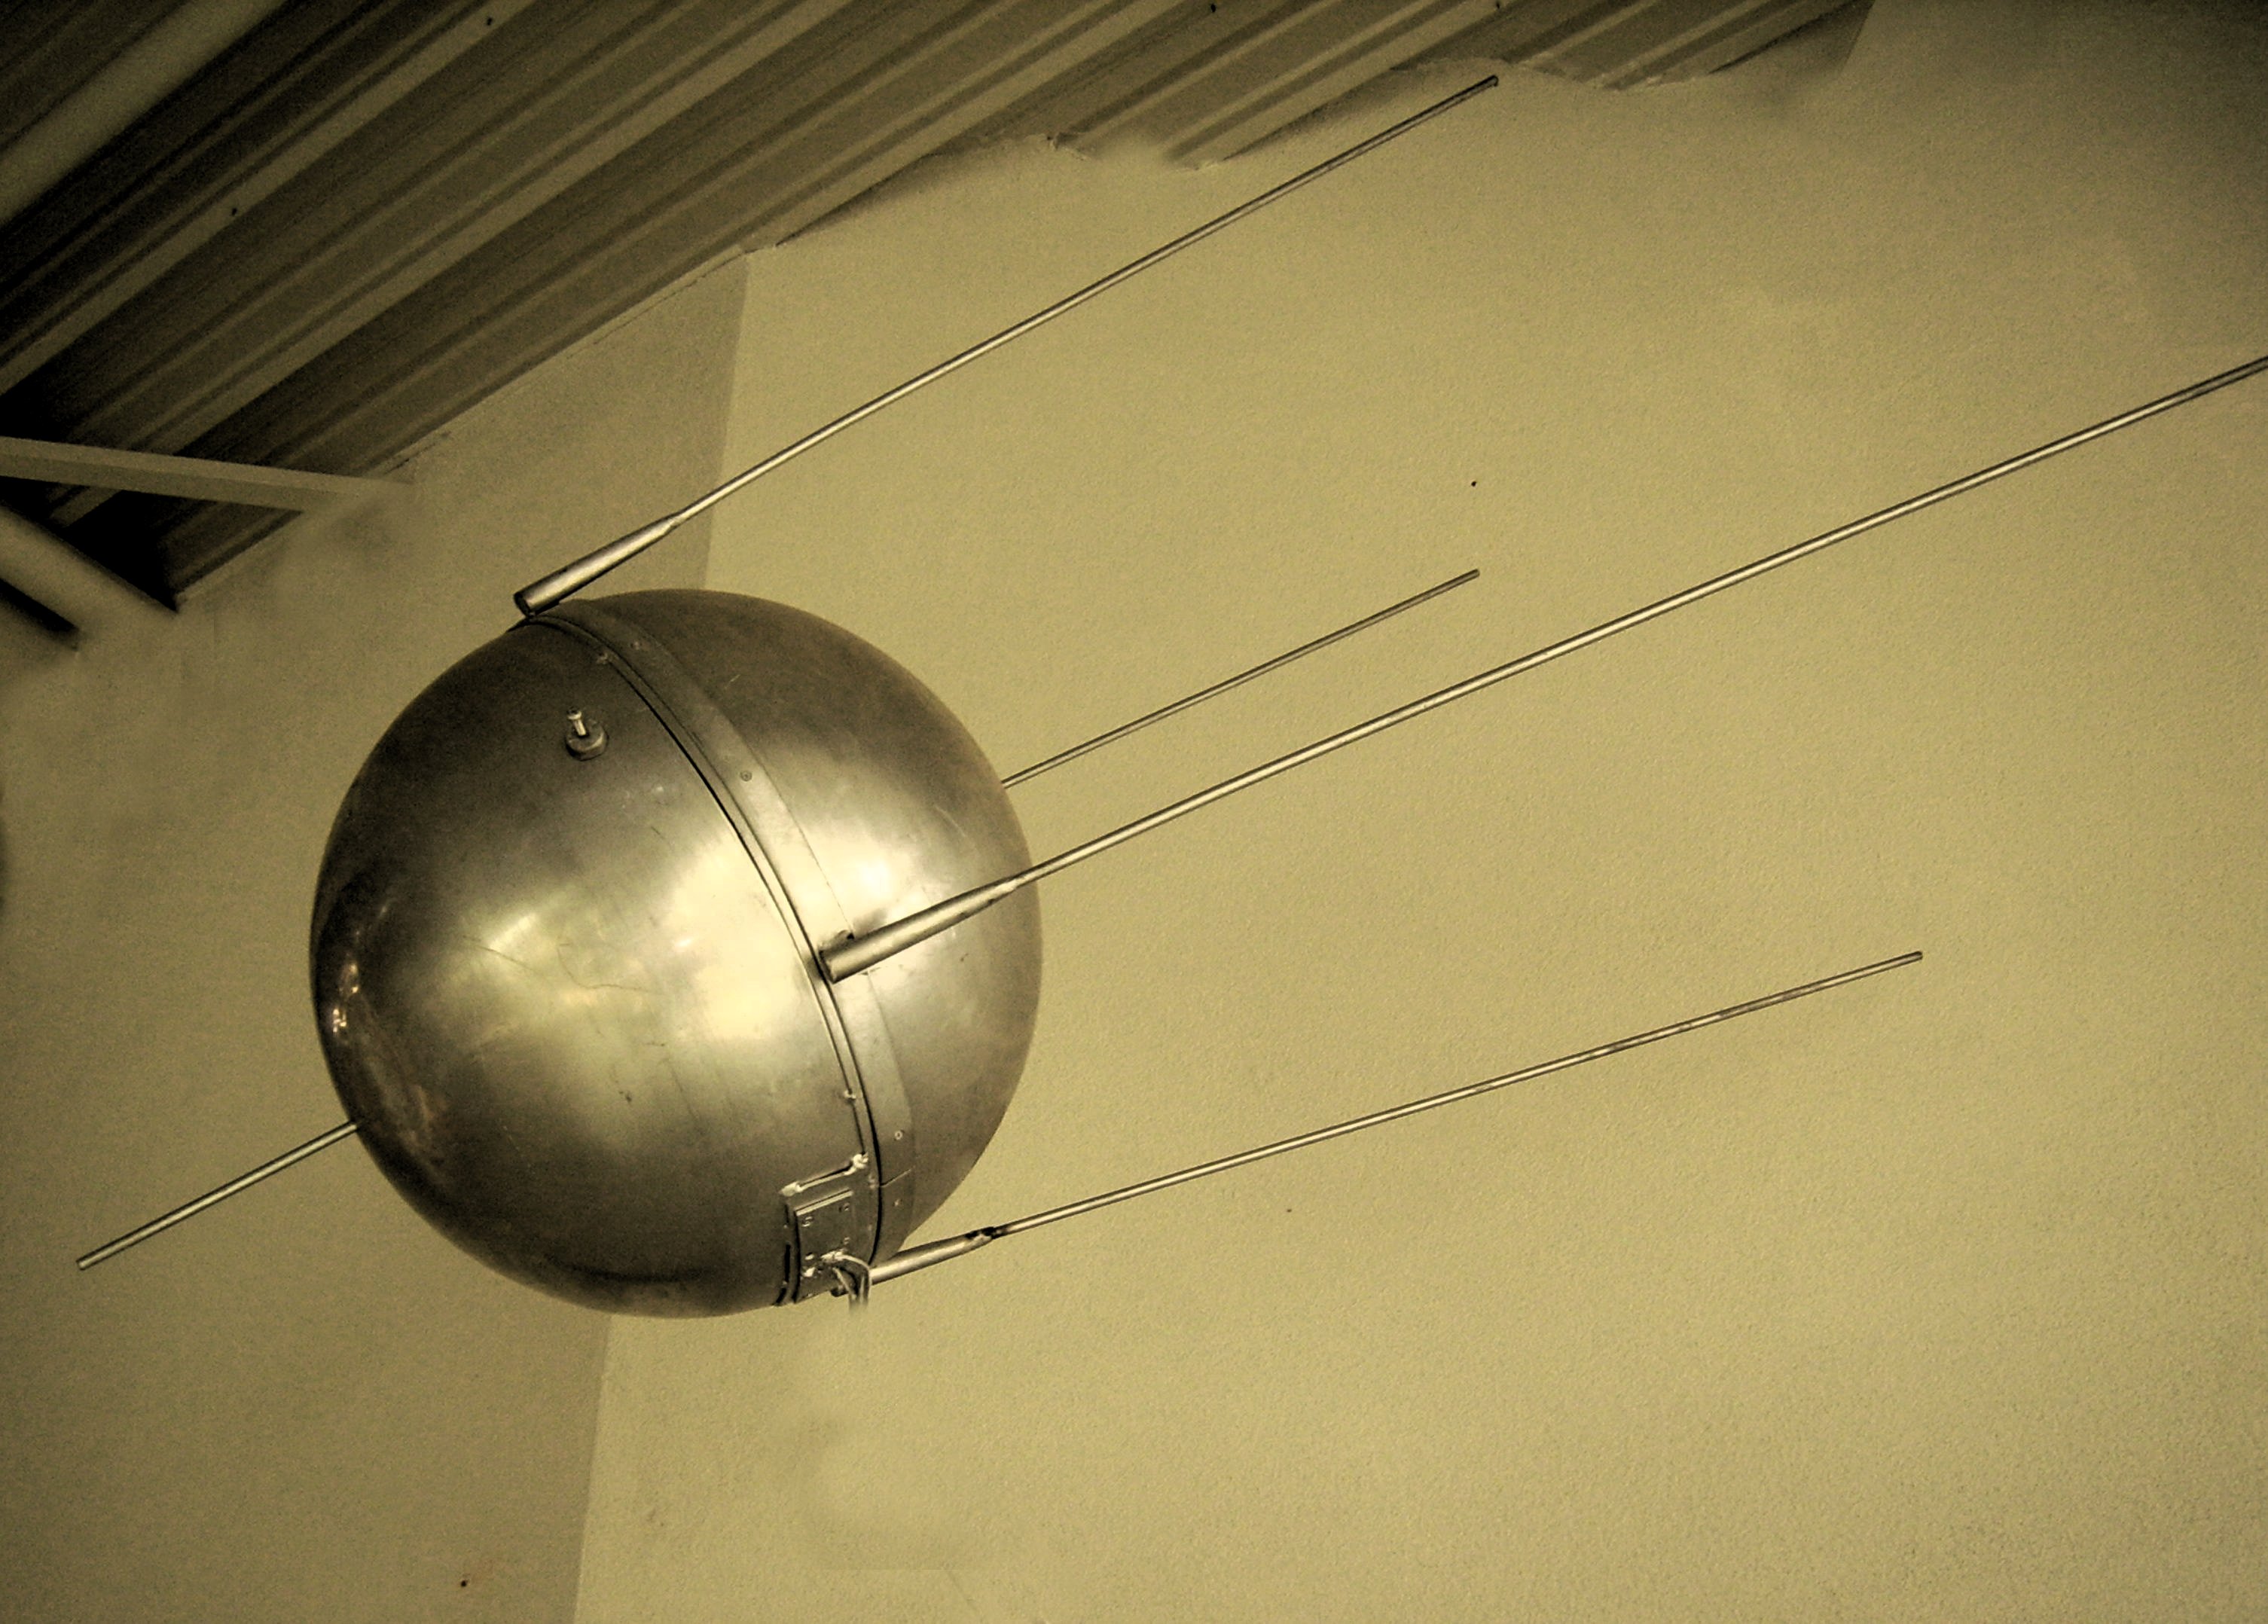 Was Sputnik Really the Beginning of the Space Age? – Brewminate: A Bold ...